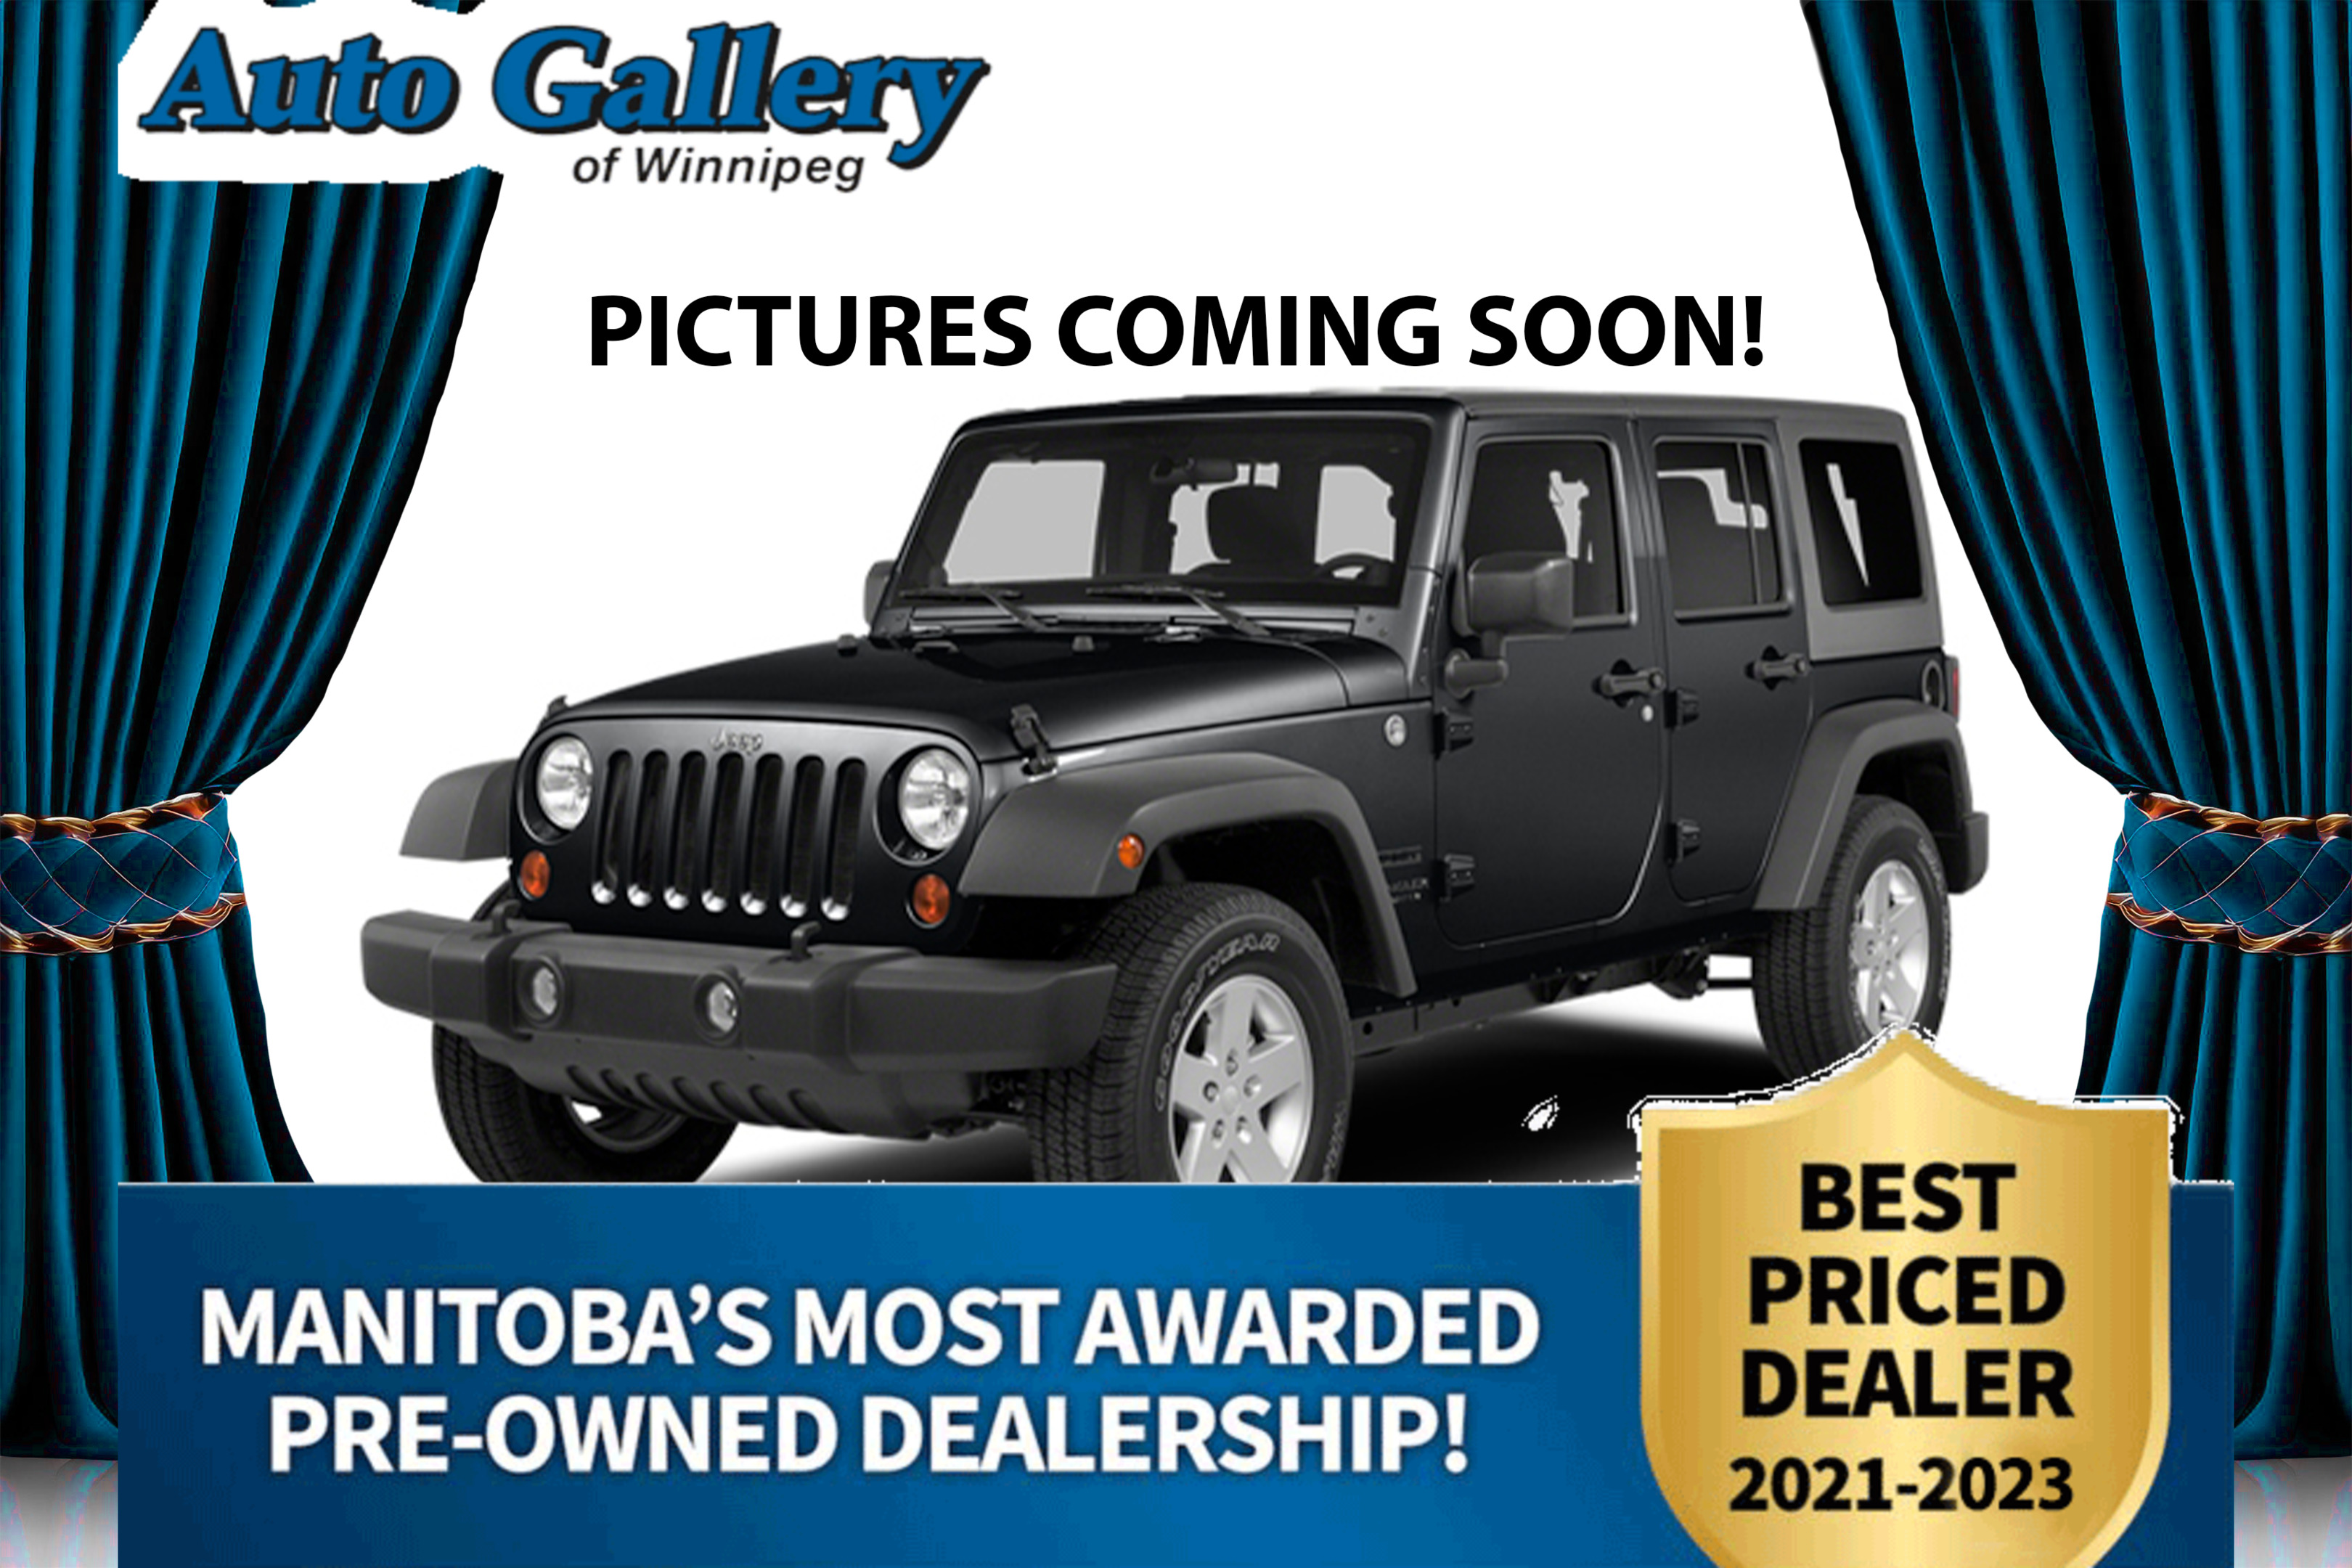 2014 Jeep WRANGLER UNLIMITED 4WD 4dr Sport, HARD TOP, A/C, RADIO, POWER WINDOWS